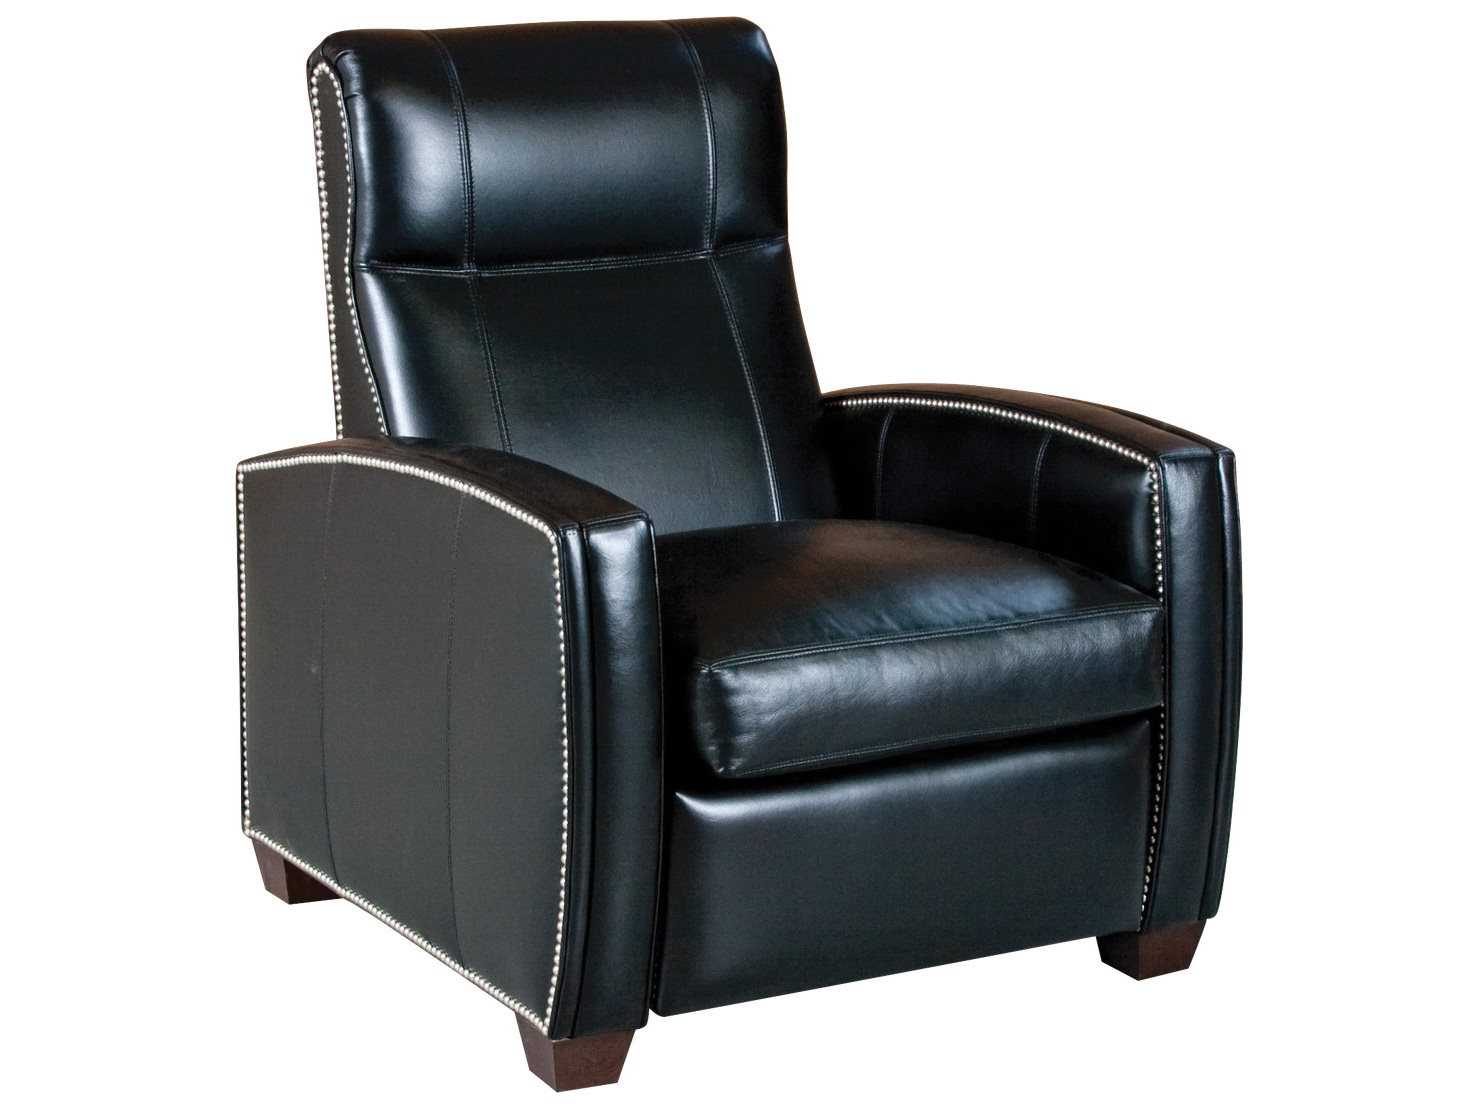 Classic Leather Thompson Low Leg Recliner Chair Cl8701llr